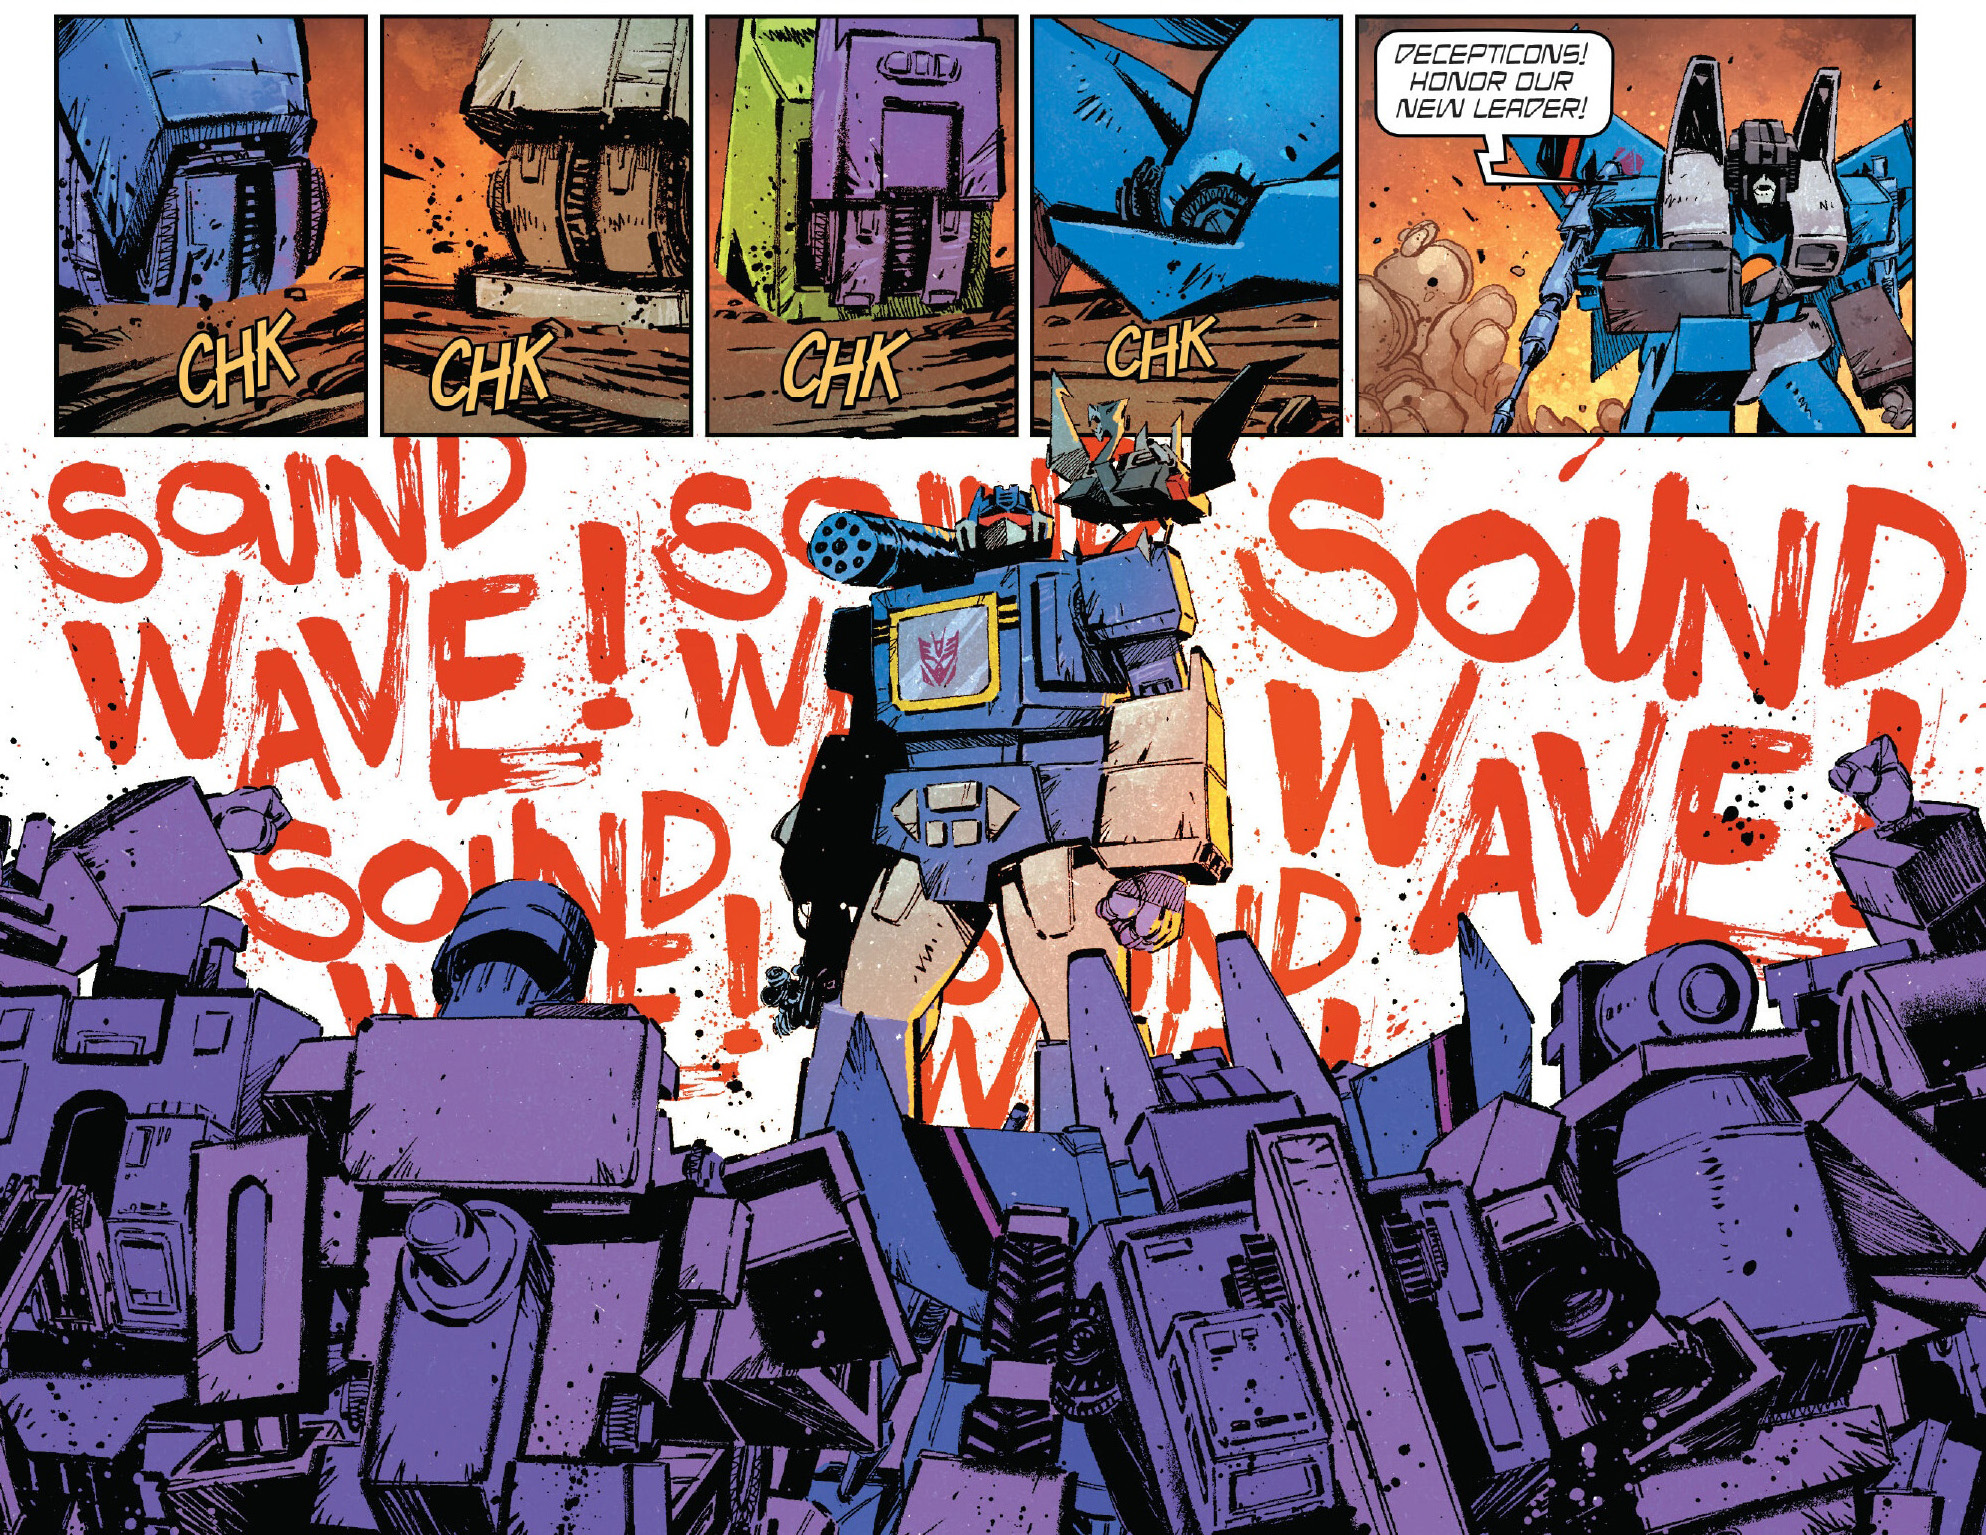 Art from Transformers #7